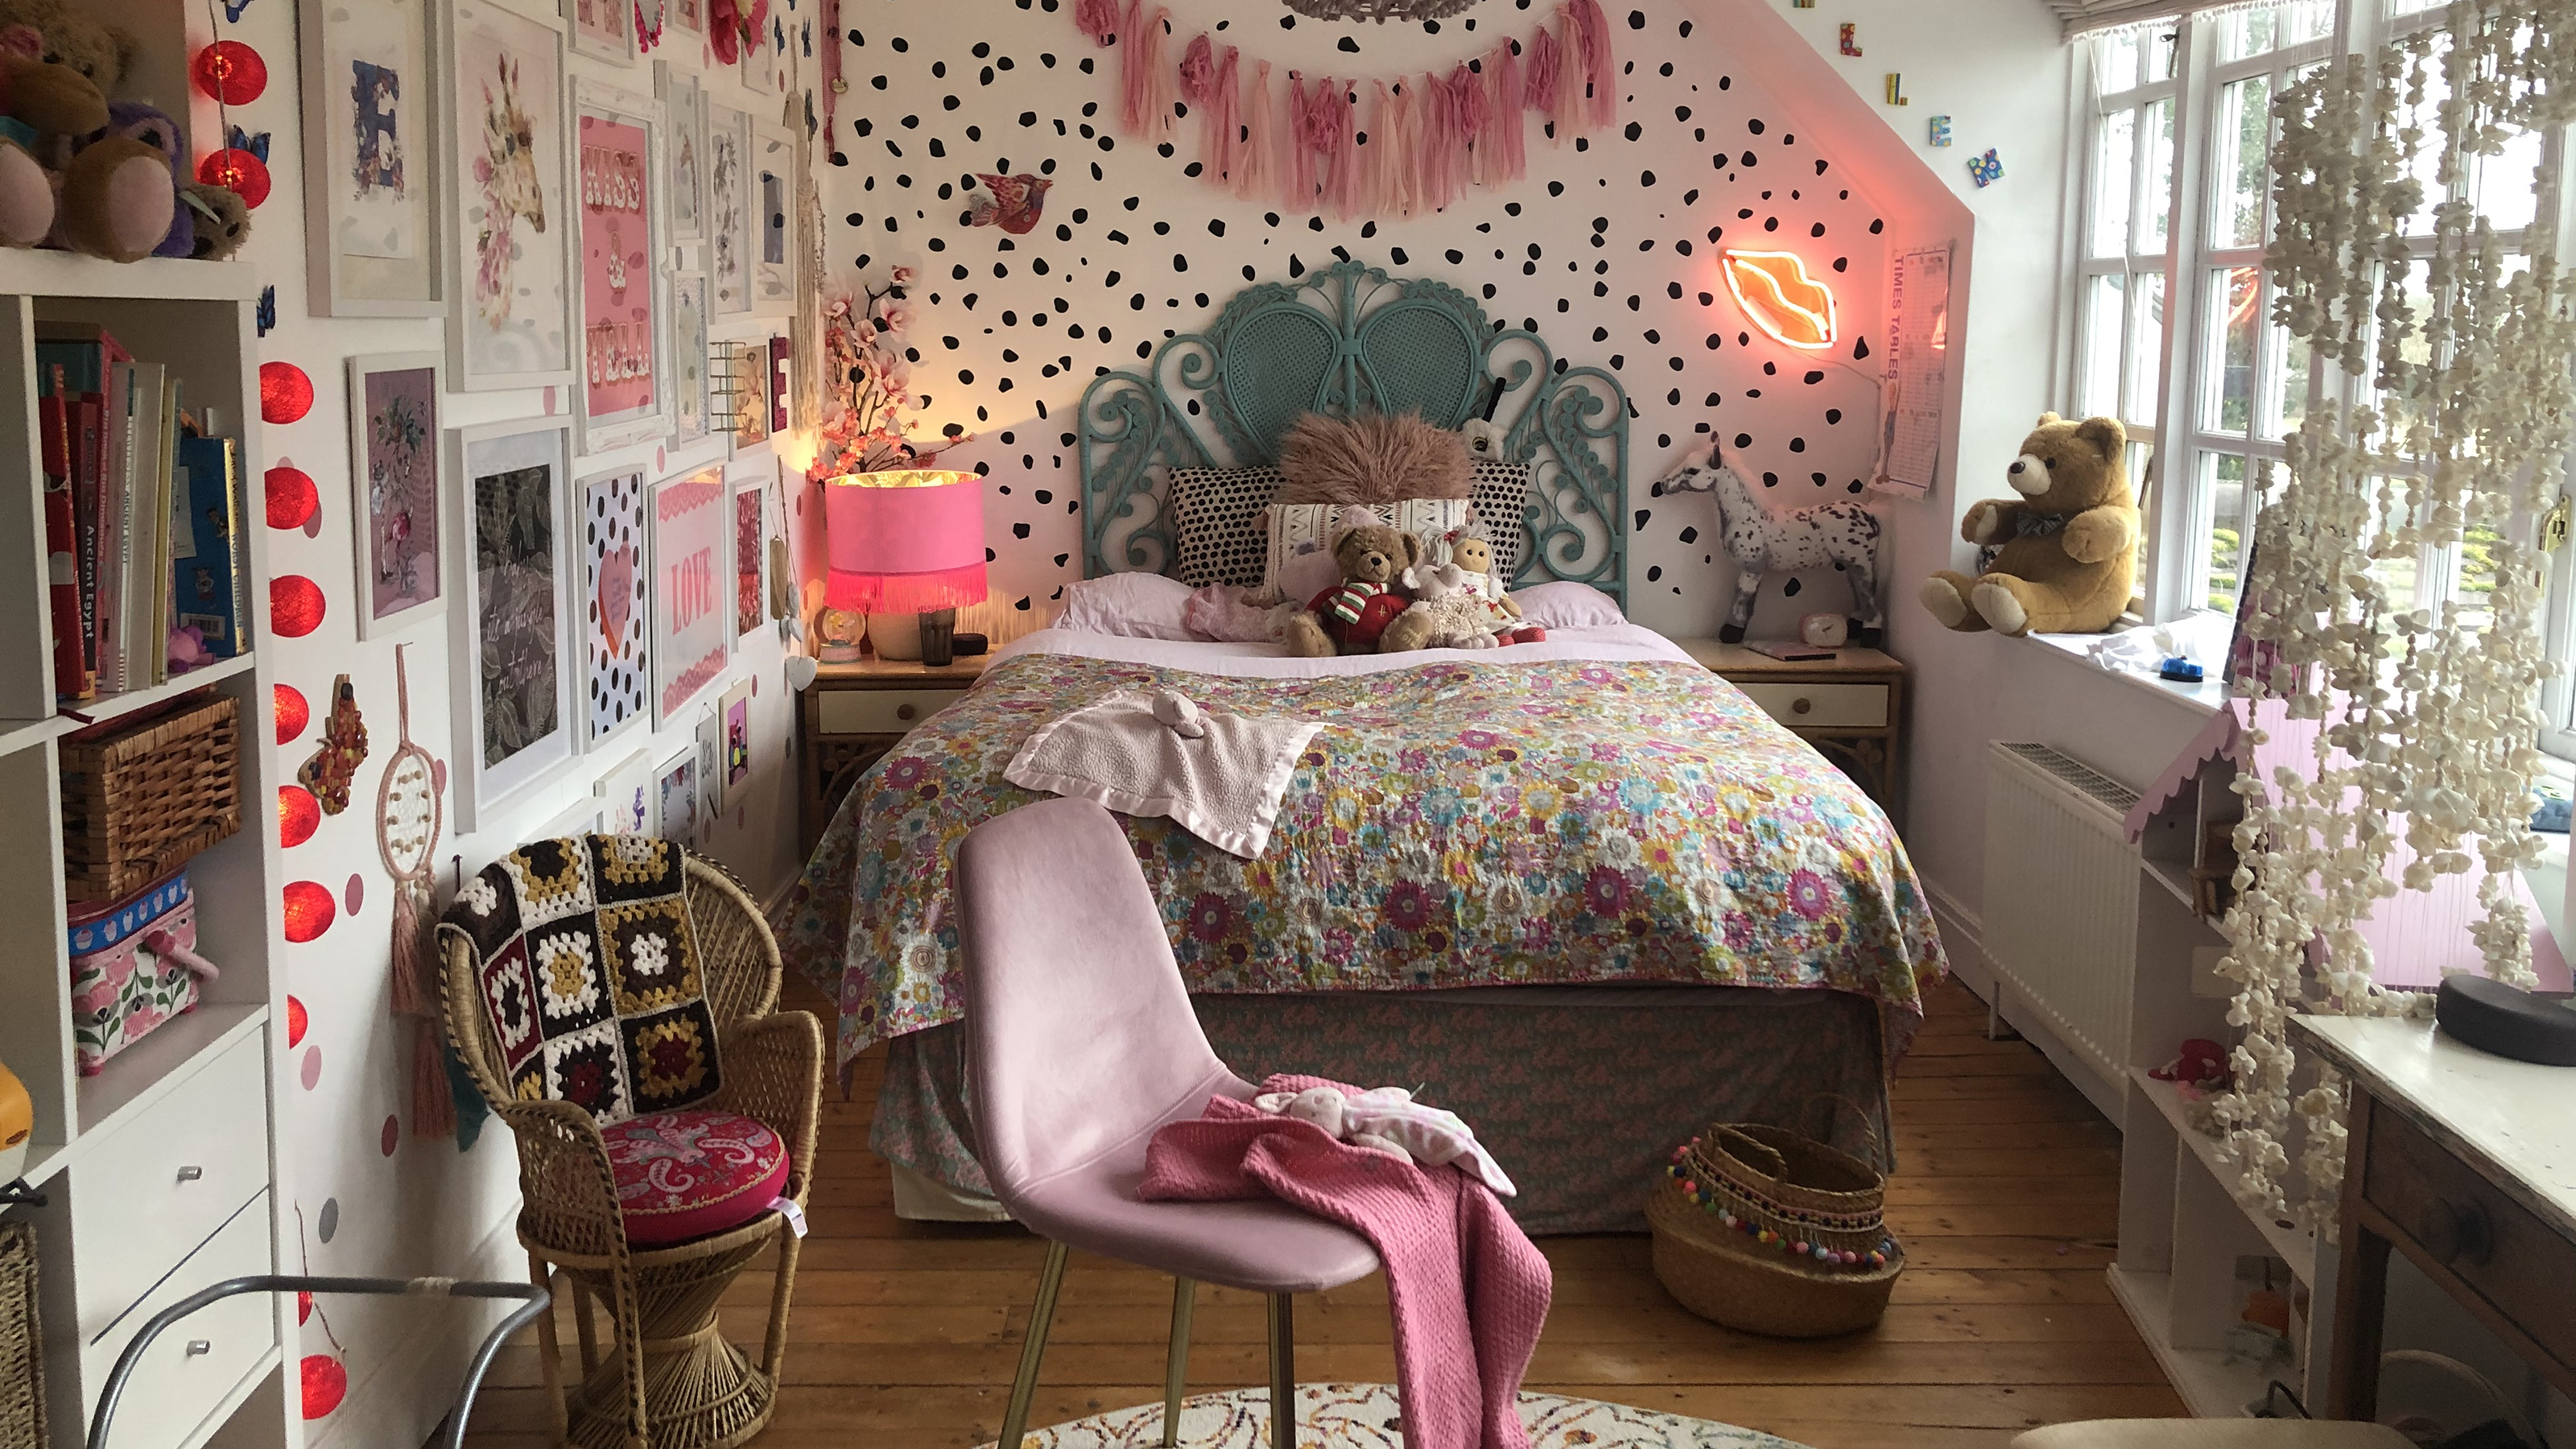 6. Incorporate pink in your bedding